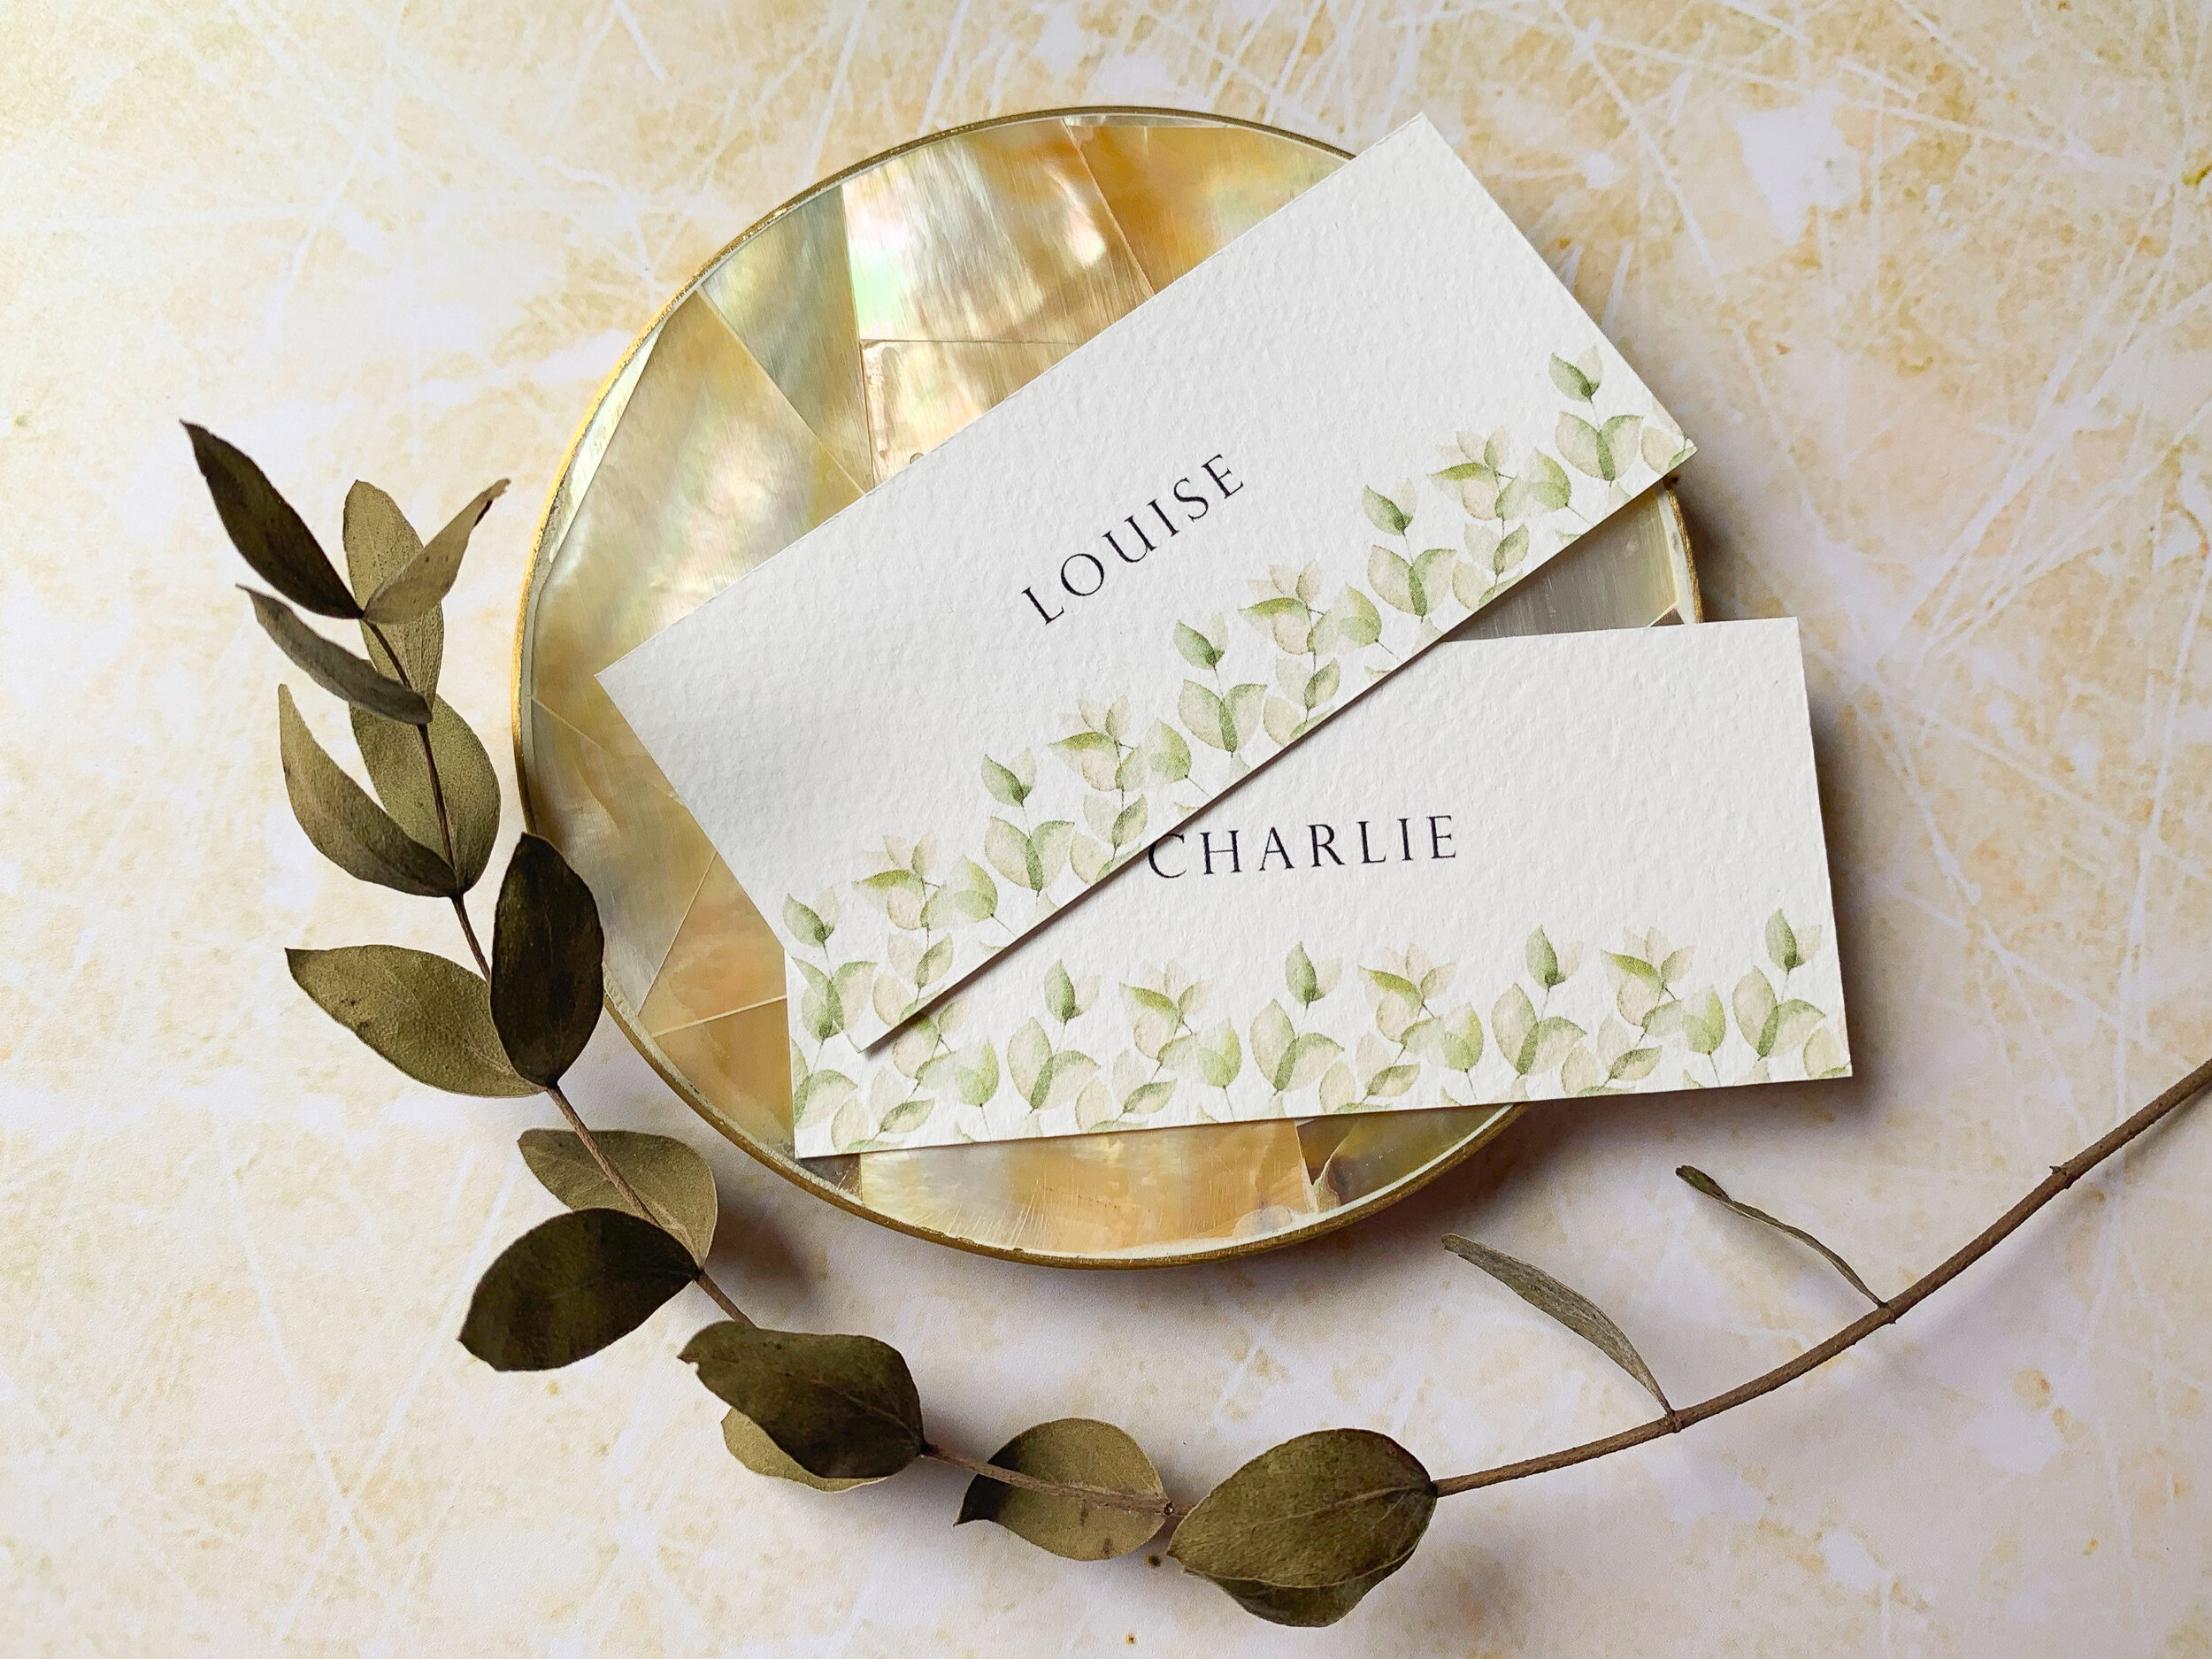 Golden Hour place cards.jpg